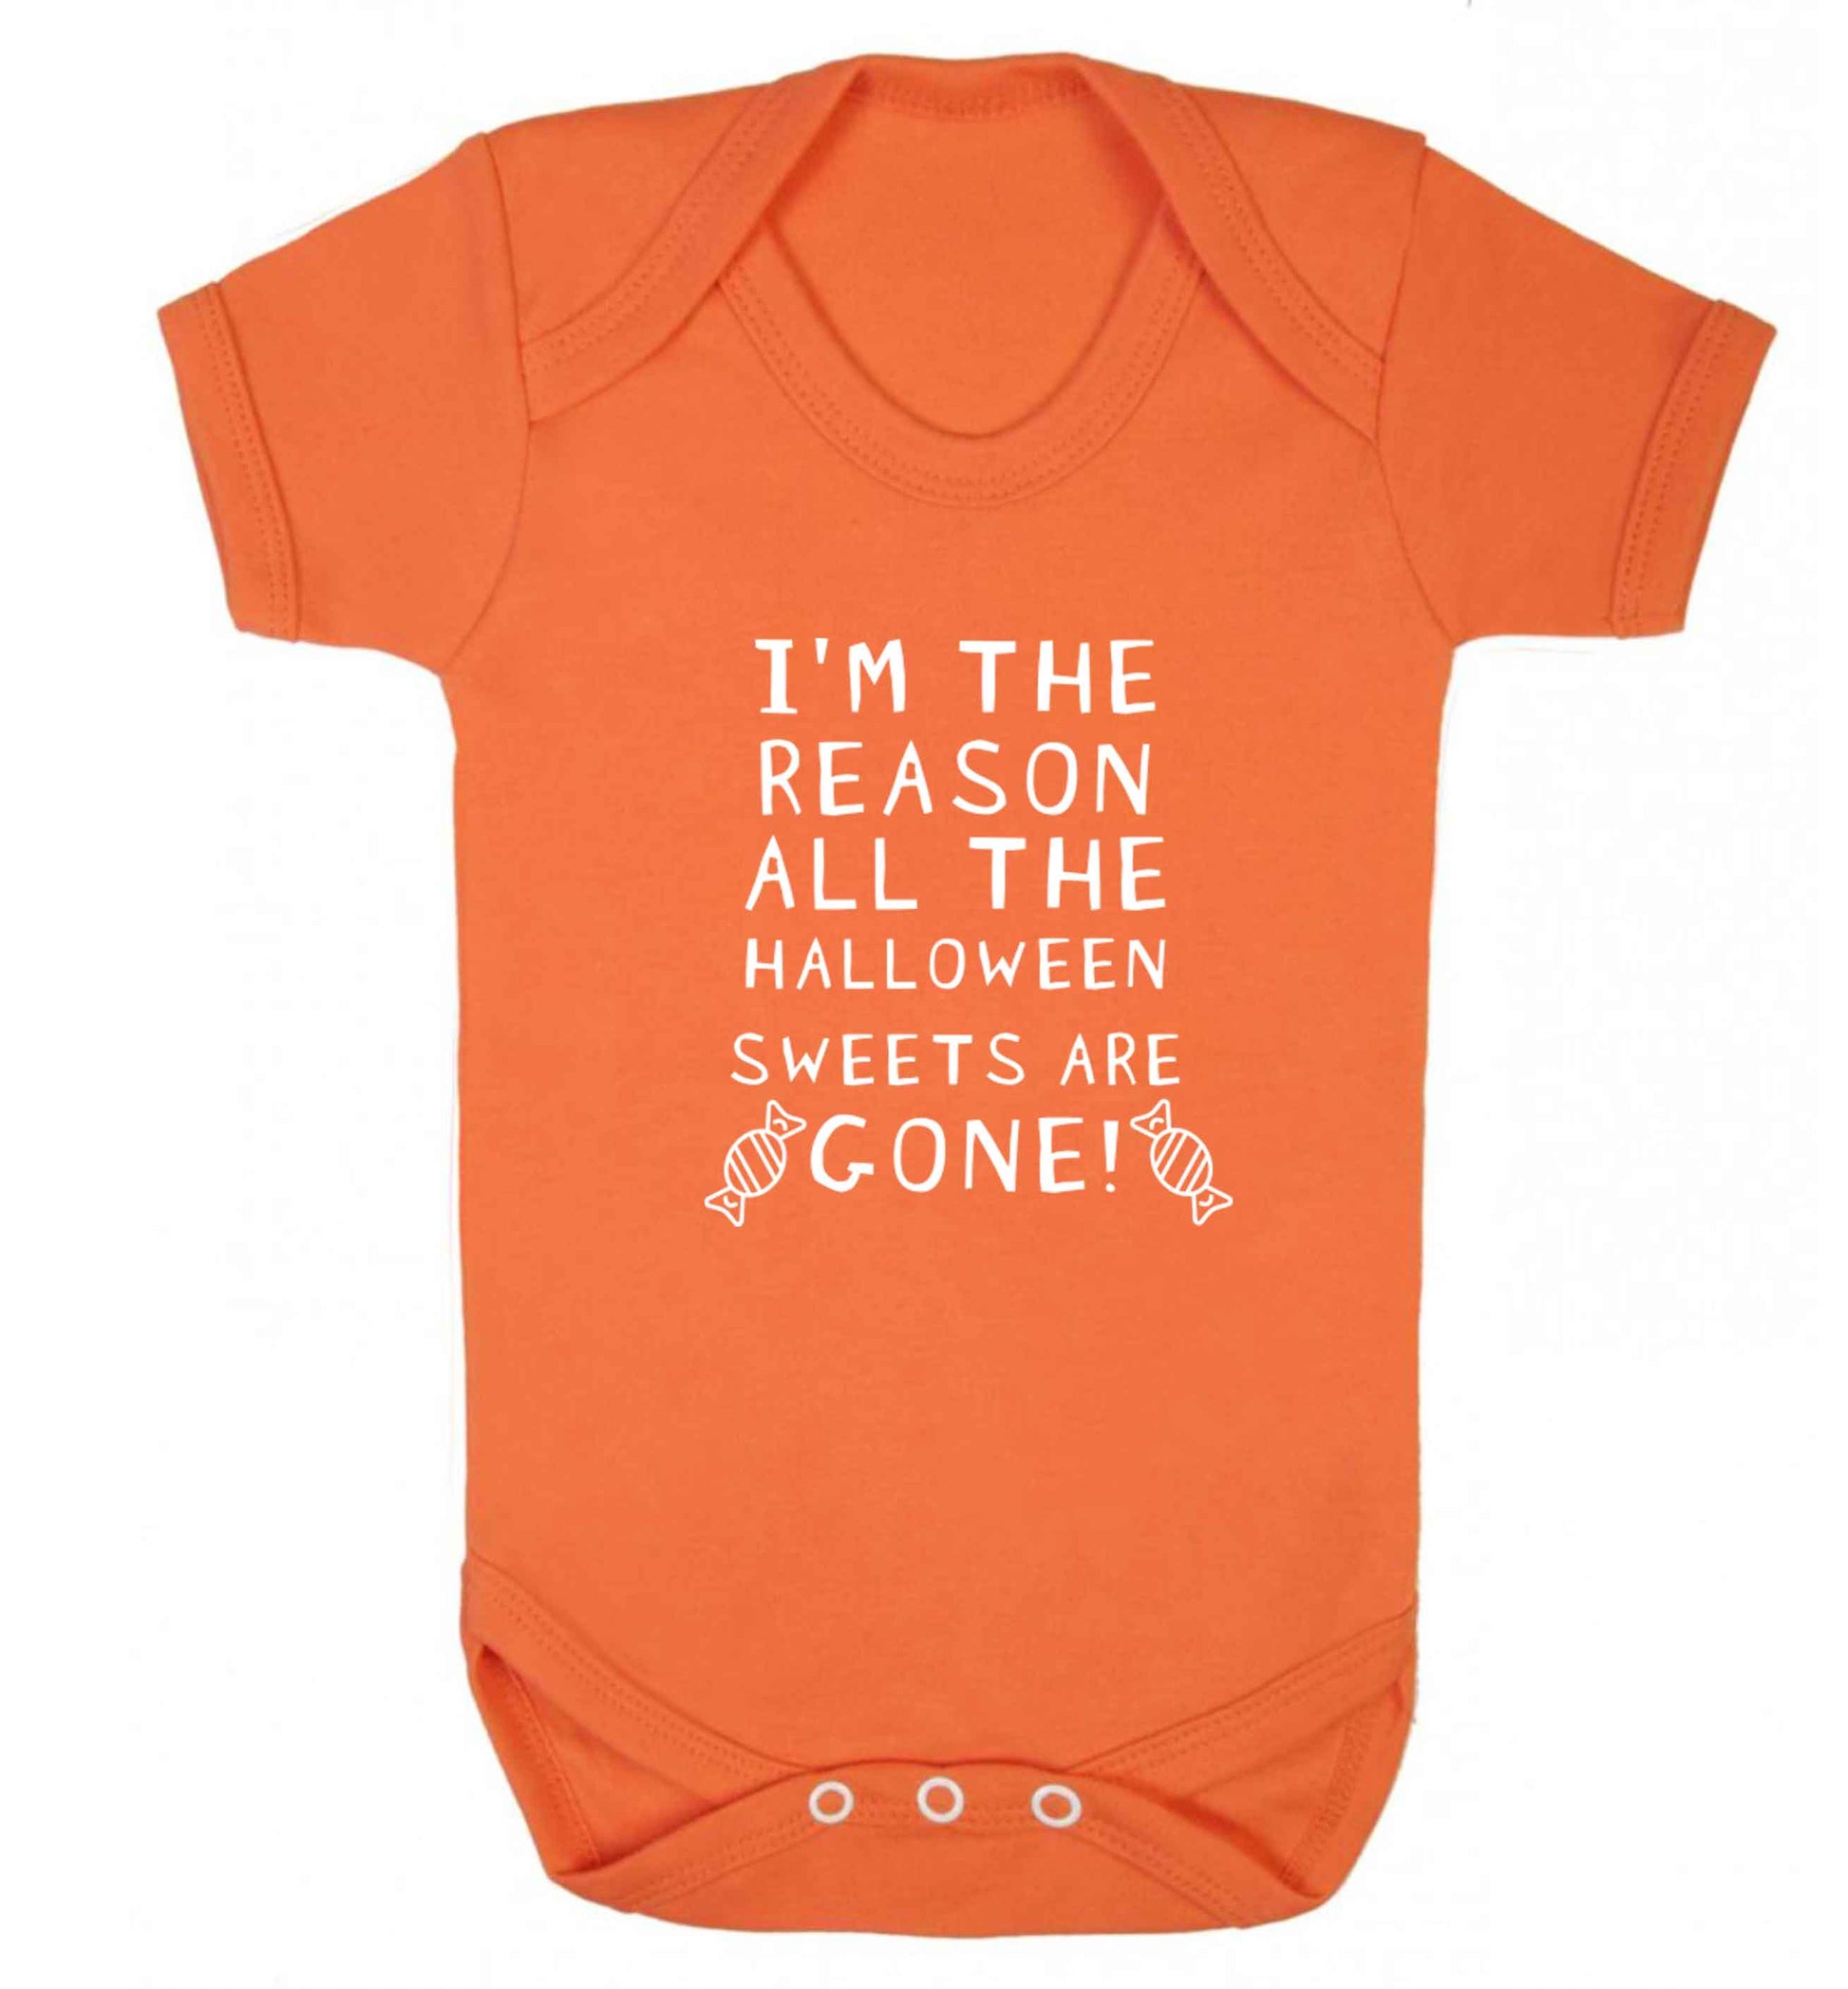 I'm the reason all of the halloween sweets are gone baby vest orange 18-24 months